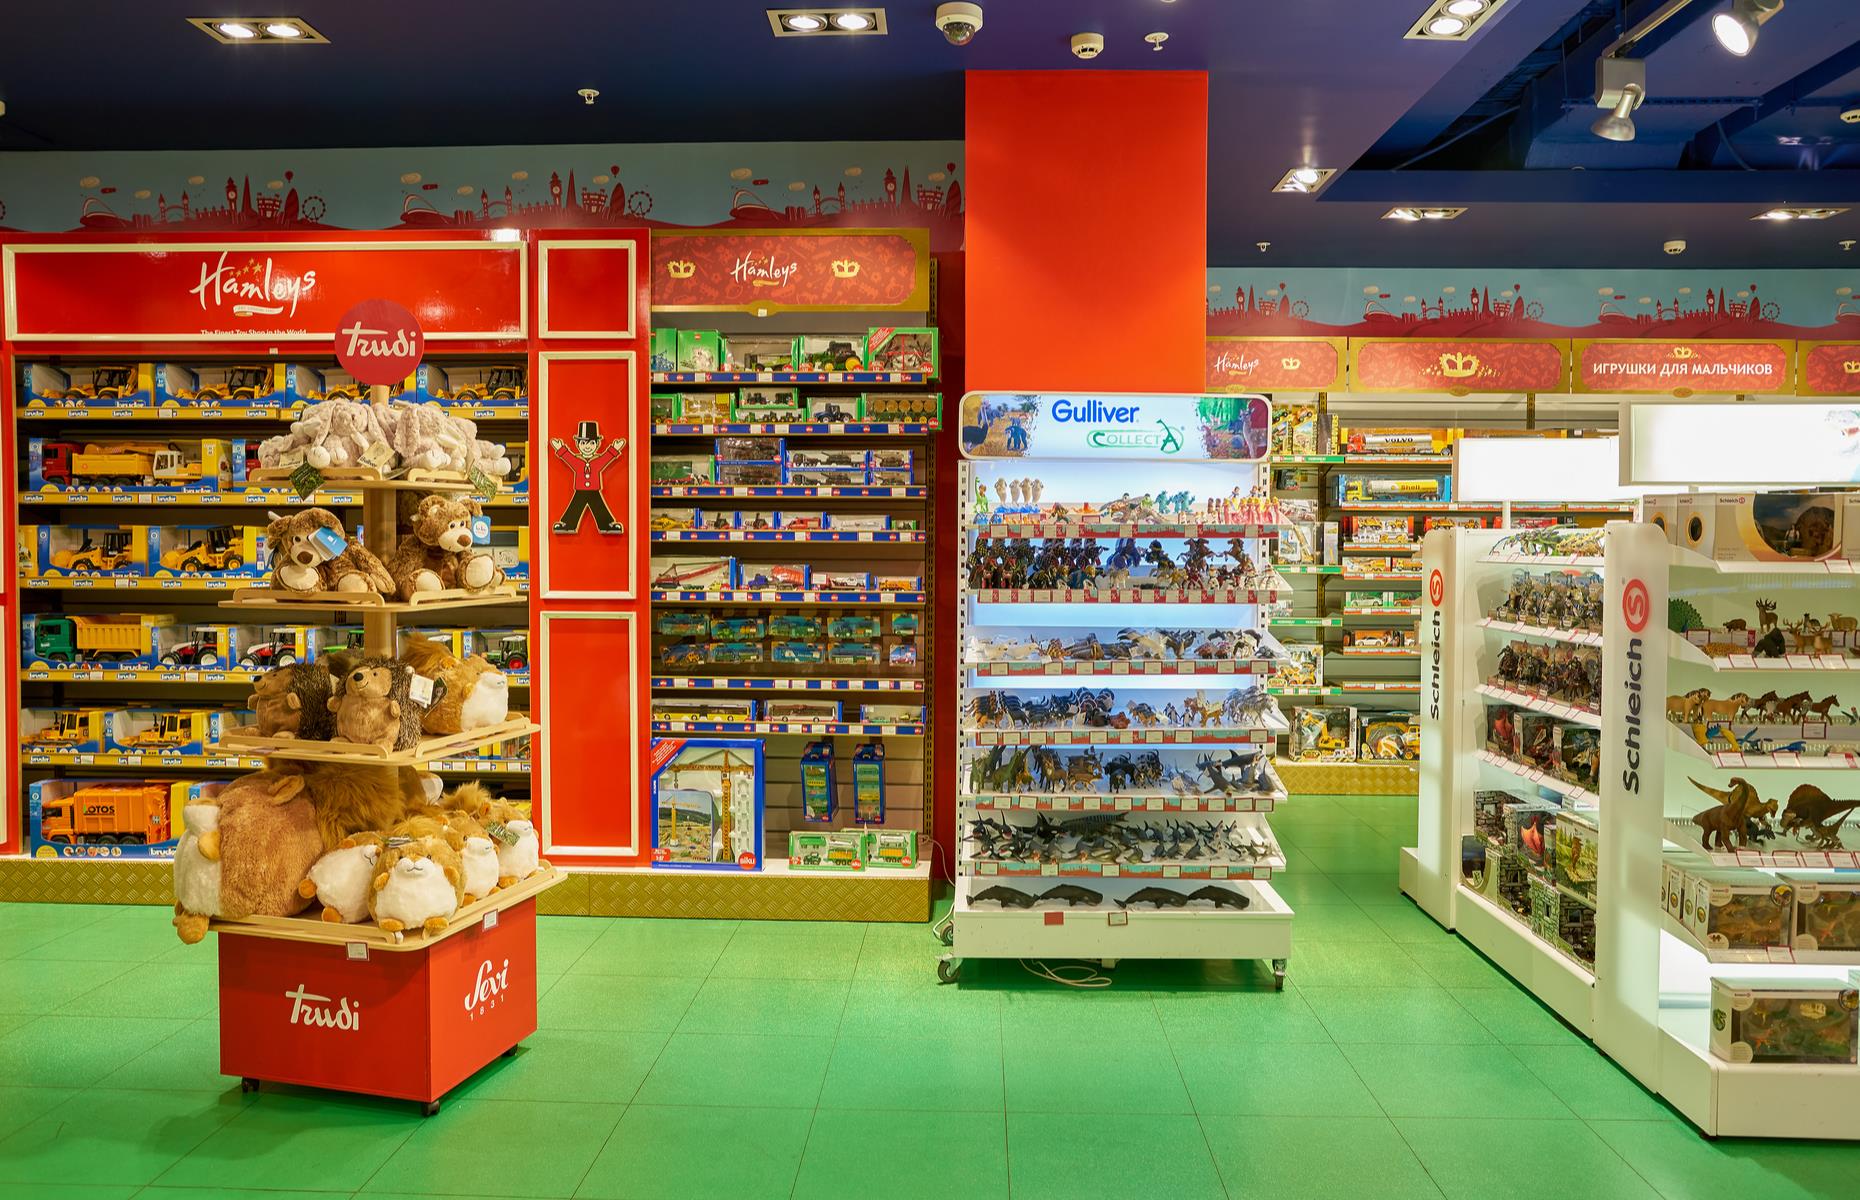 Hamleys is now a Chinese company